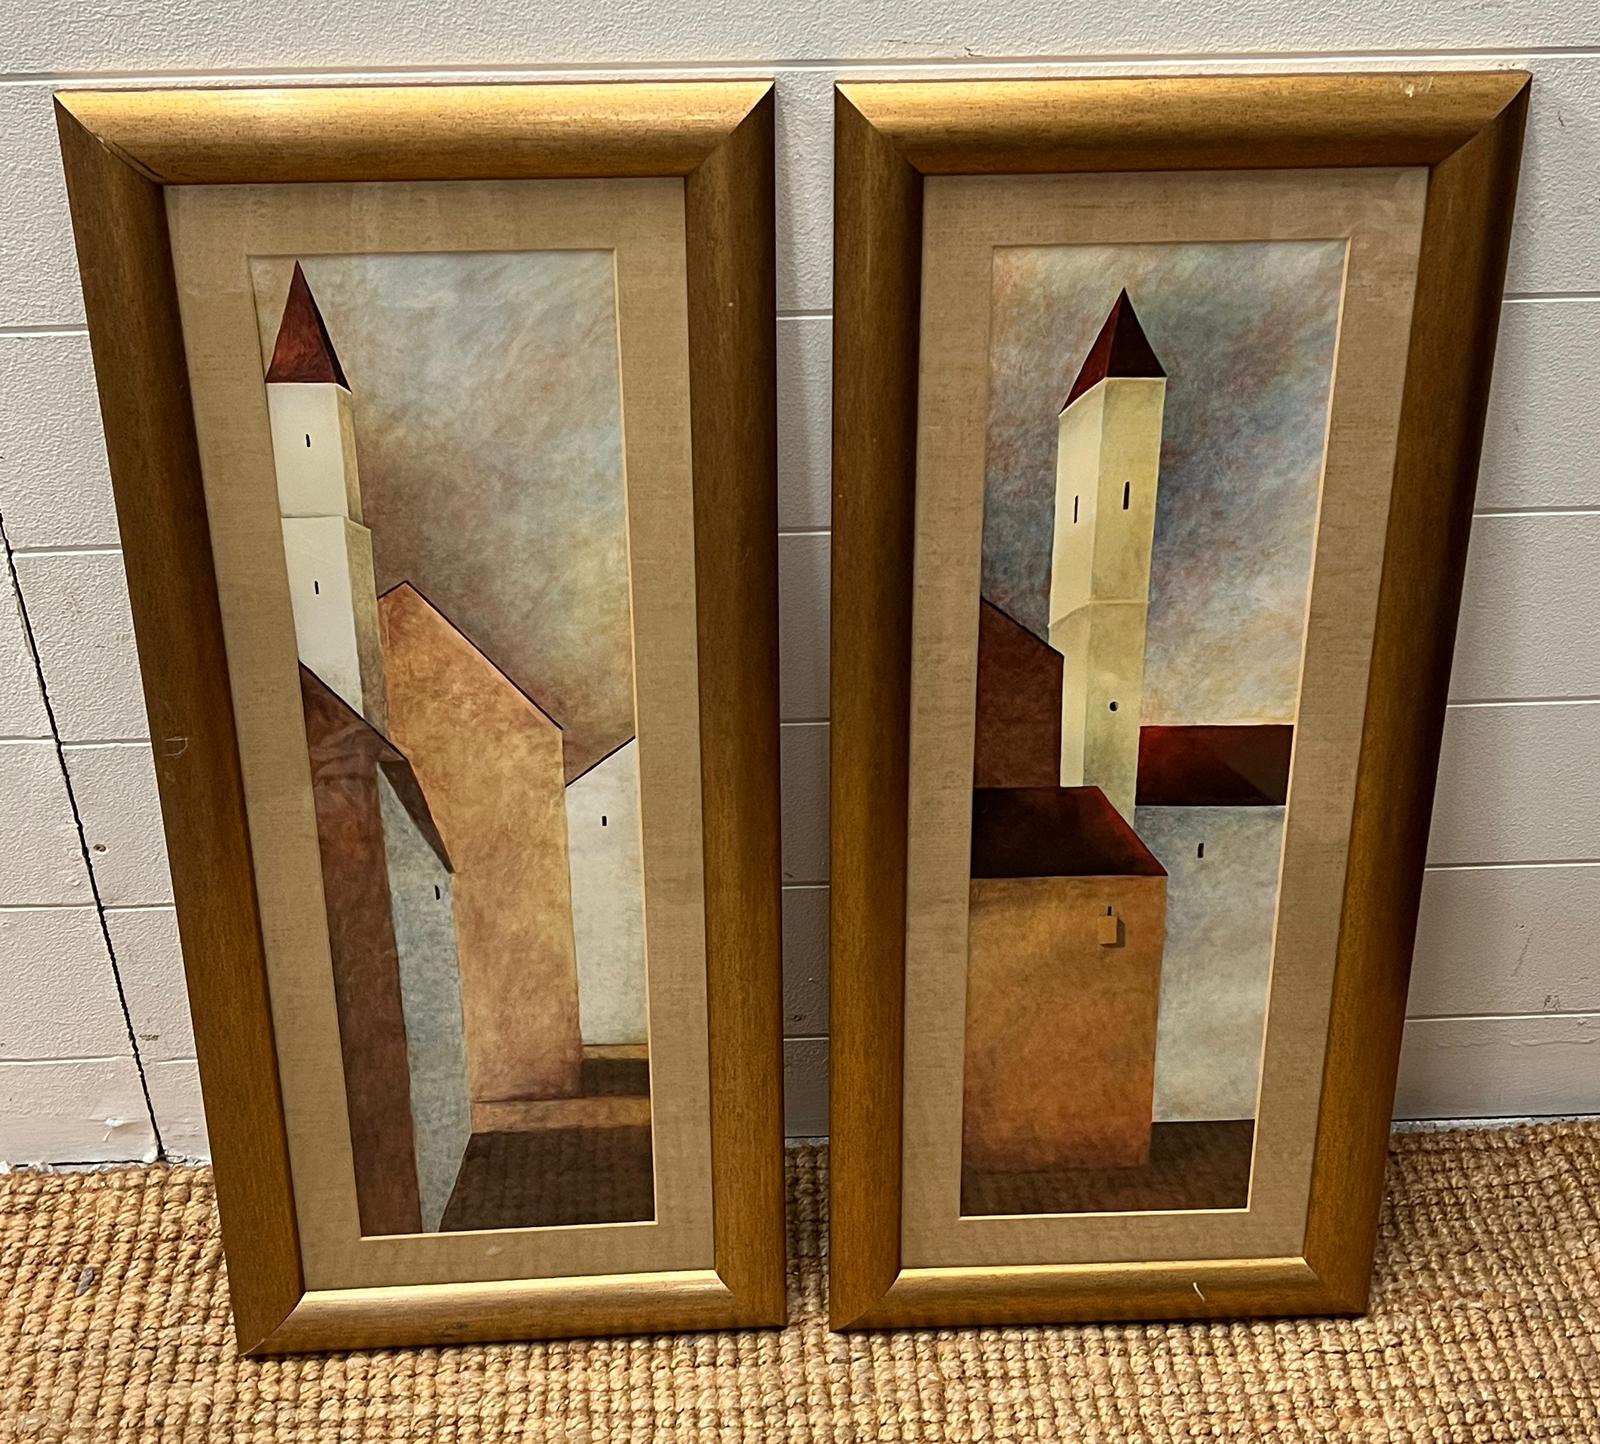 A pair of prints of abstract in style of street scene.